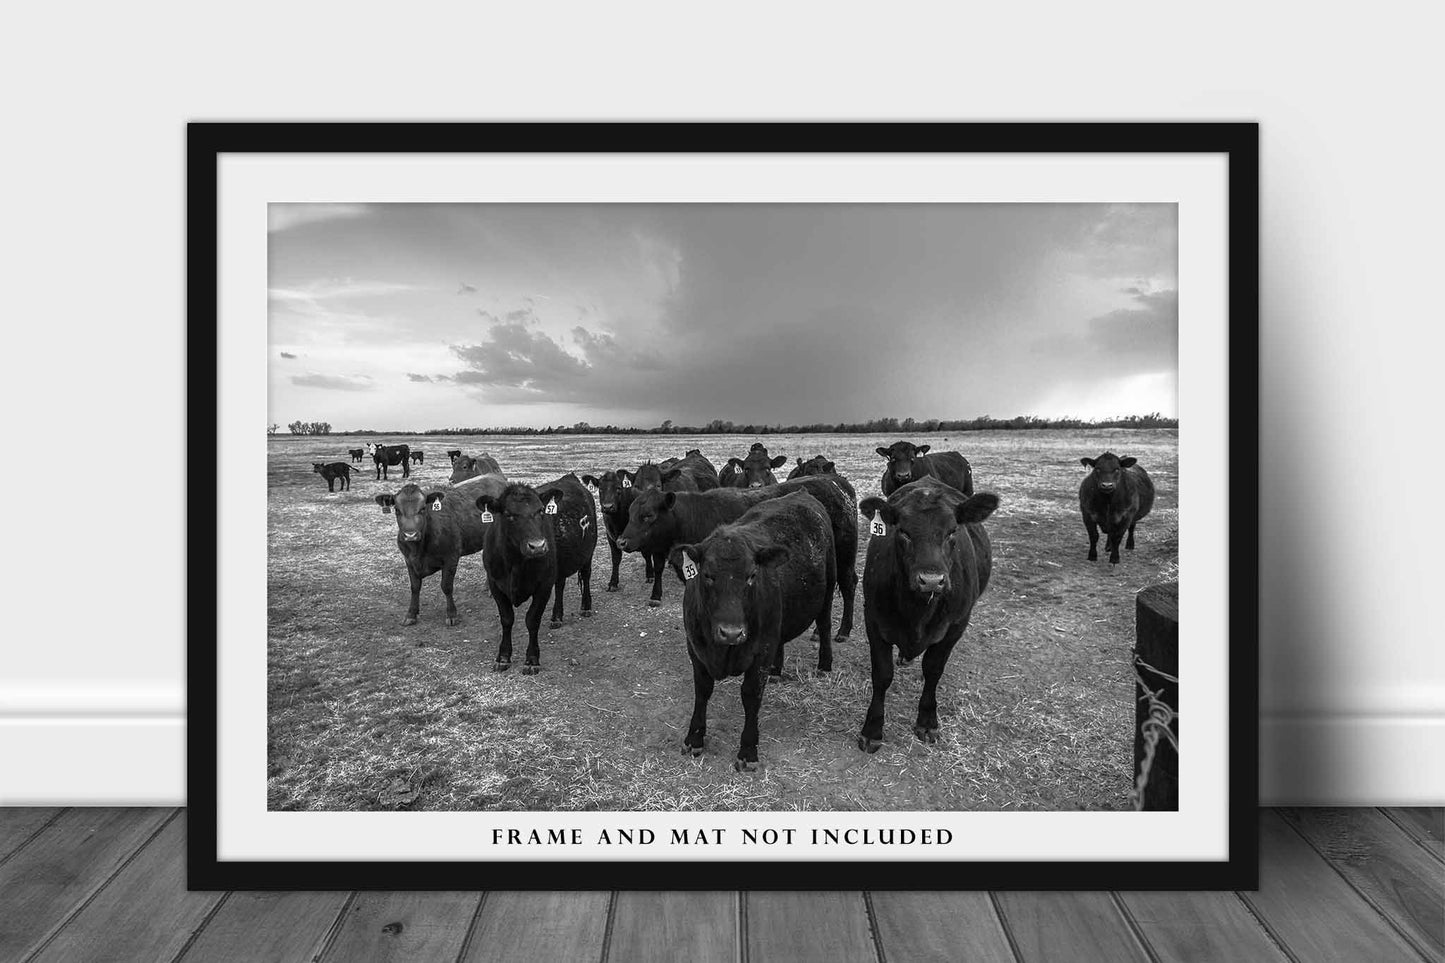 Cow Photography Print | Angus Cattle Herd Picture | Kansas Wall Art | Black and White Photo | Farmhouse Decor | Not Framed